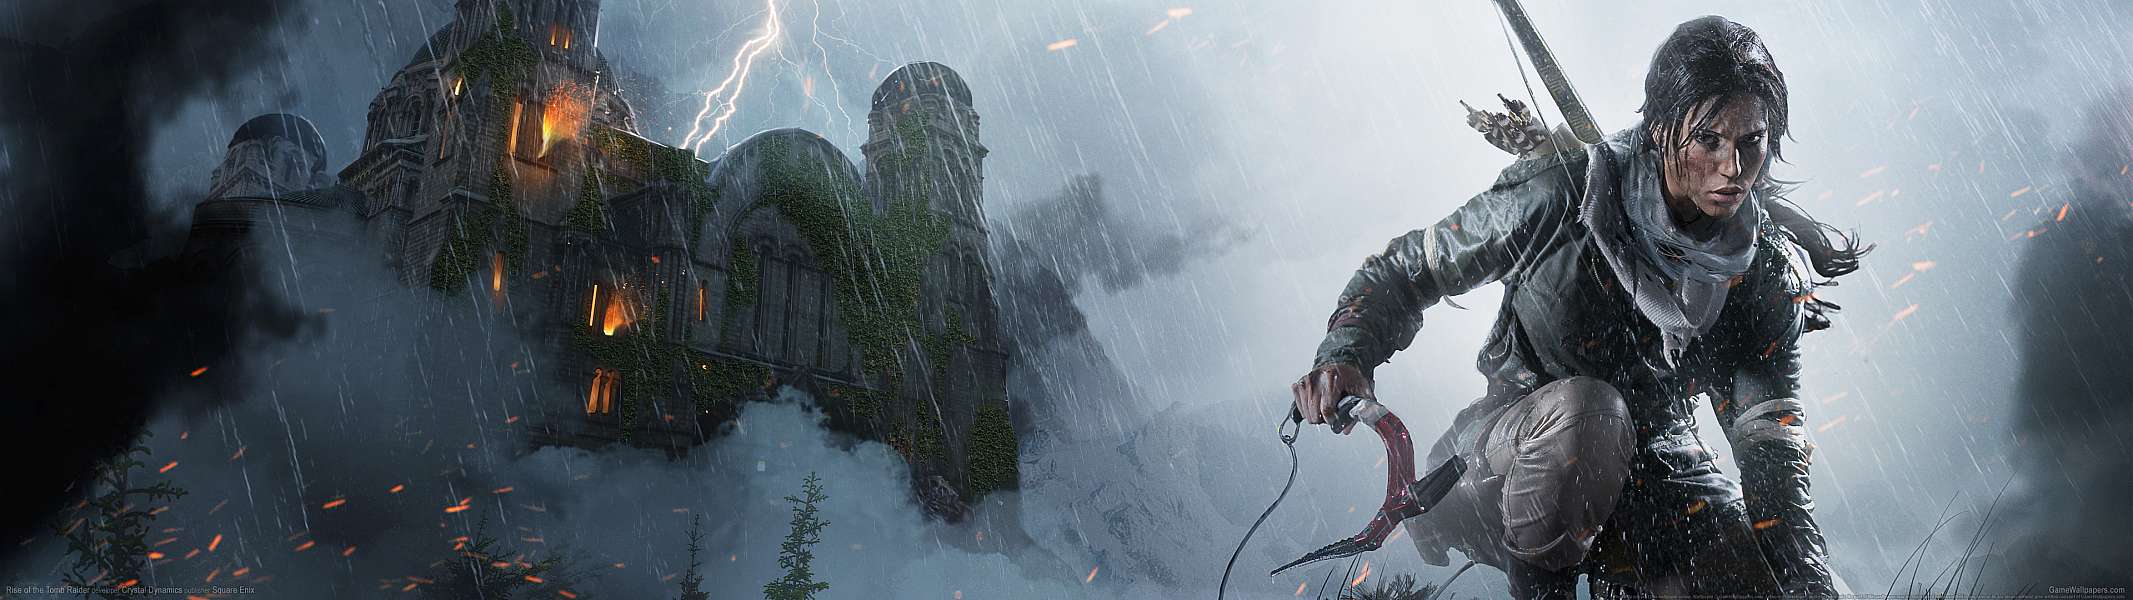 Rise of the Tomb Raider dual screen achtergrond